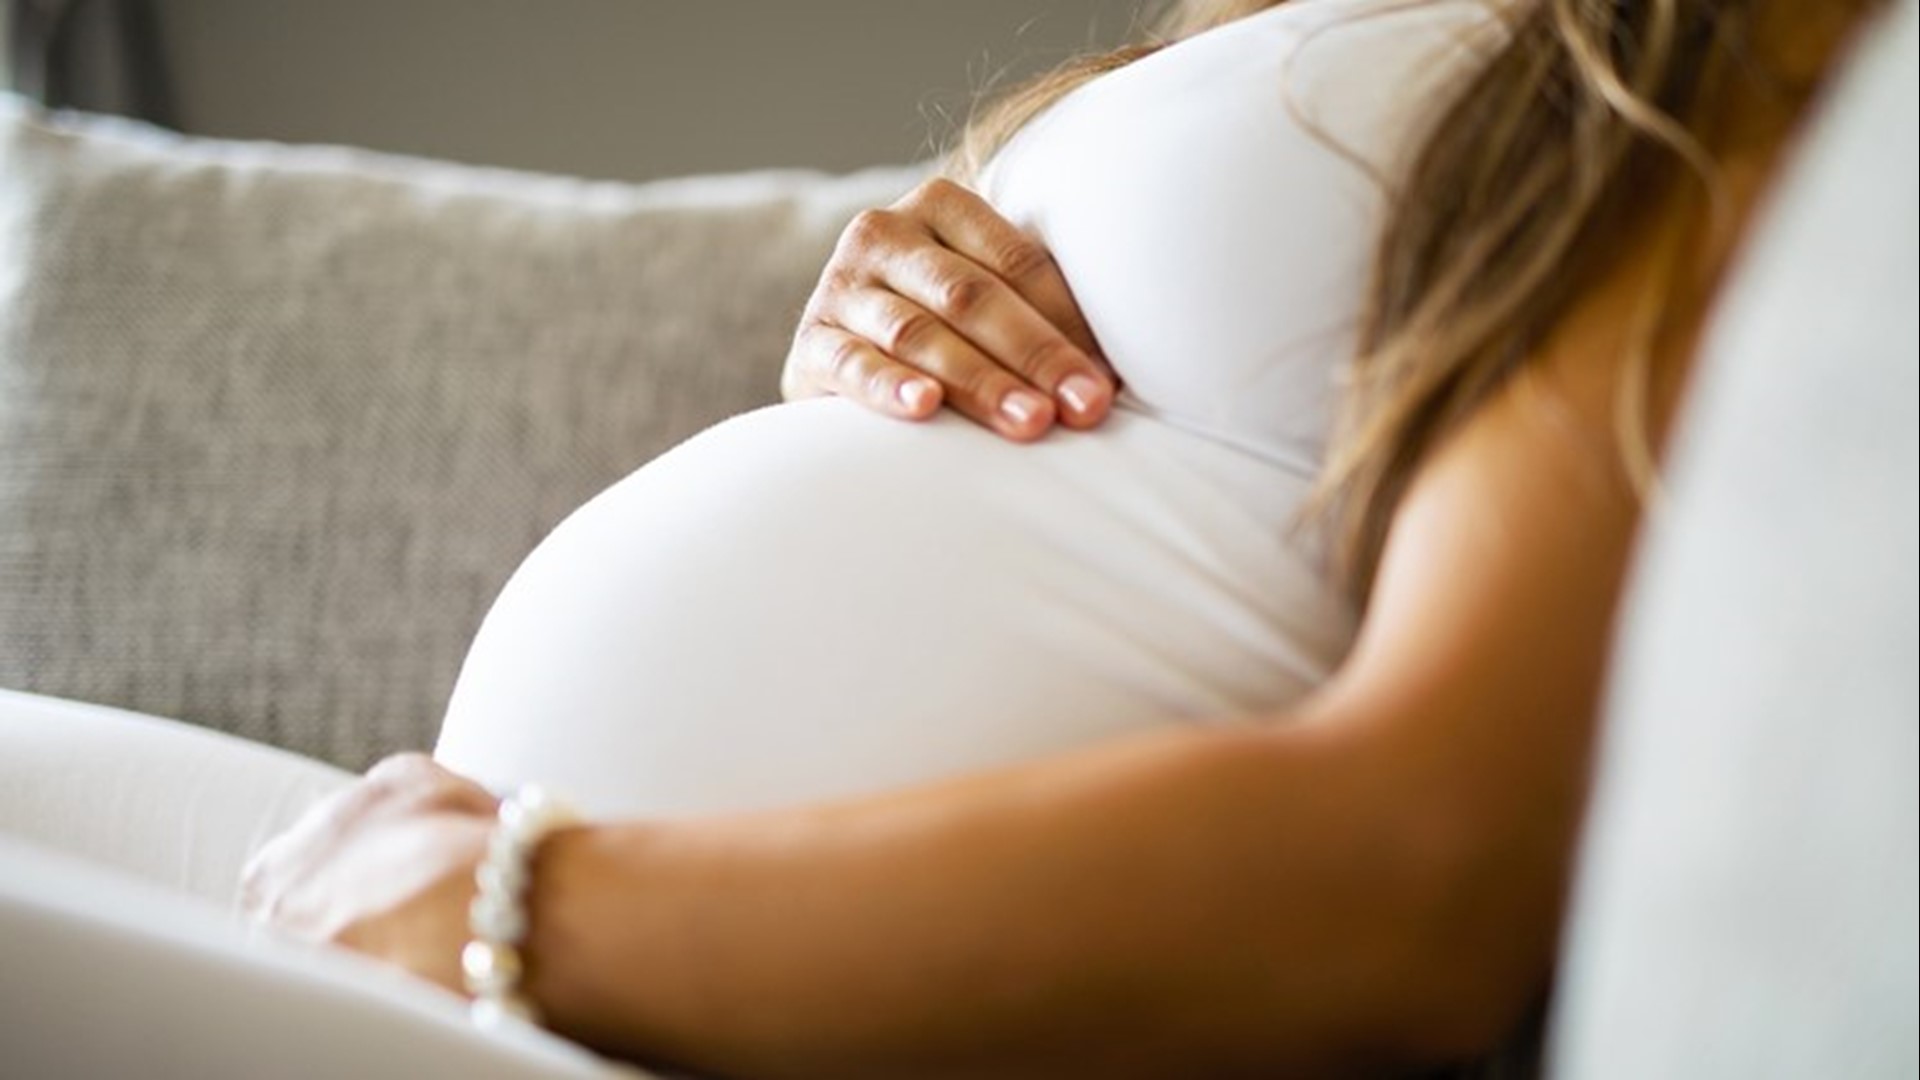 Expectant mothers talk about the added concerns regarding COVID-19 and the unexpected loneliness due to isolation precautions.